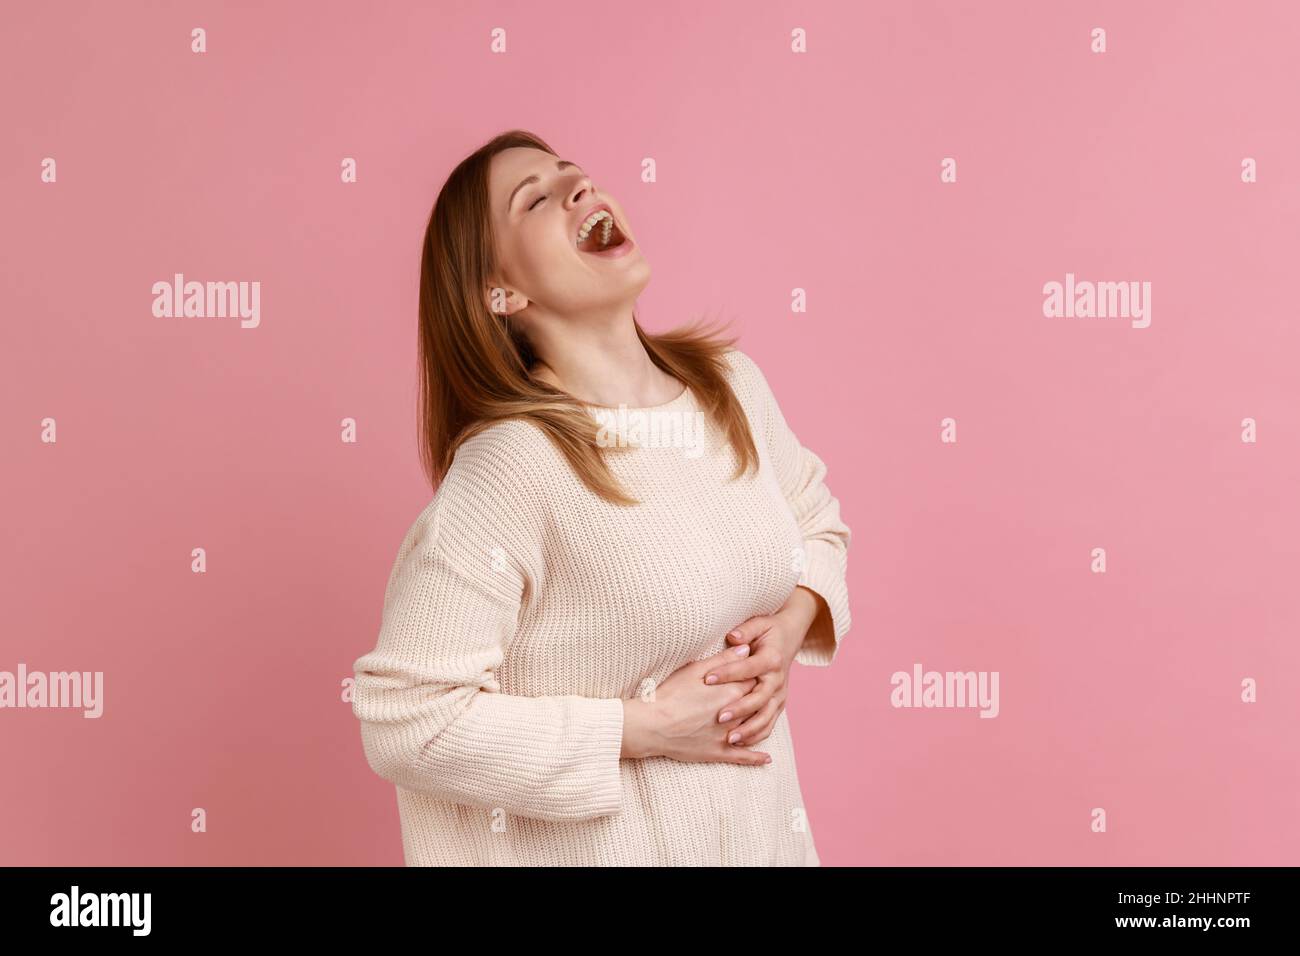 Portrait of happy blond woman holding belly, laughing out loud, taunting with hysterical laughter, mocking friend, wearing white sweater. Indoor studio shot isolated on pink background. Stock Photo